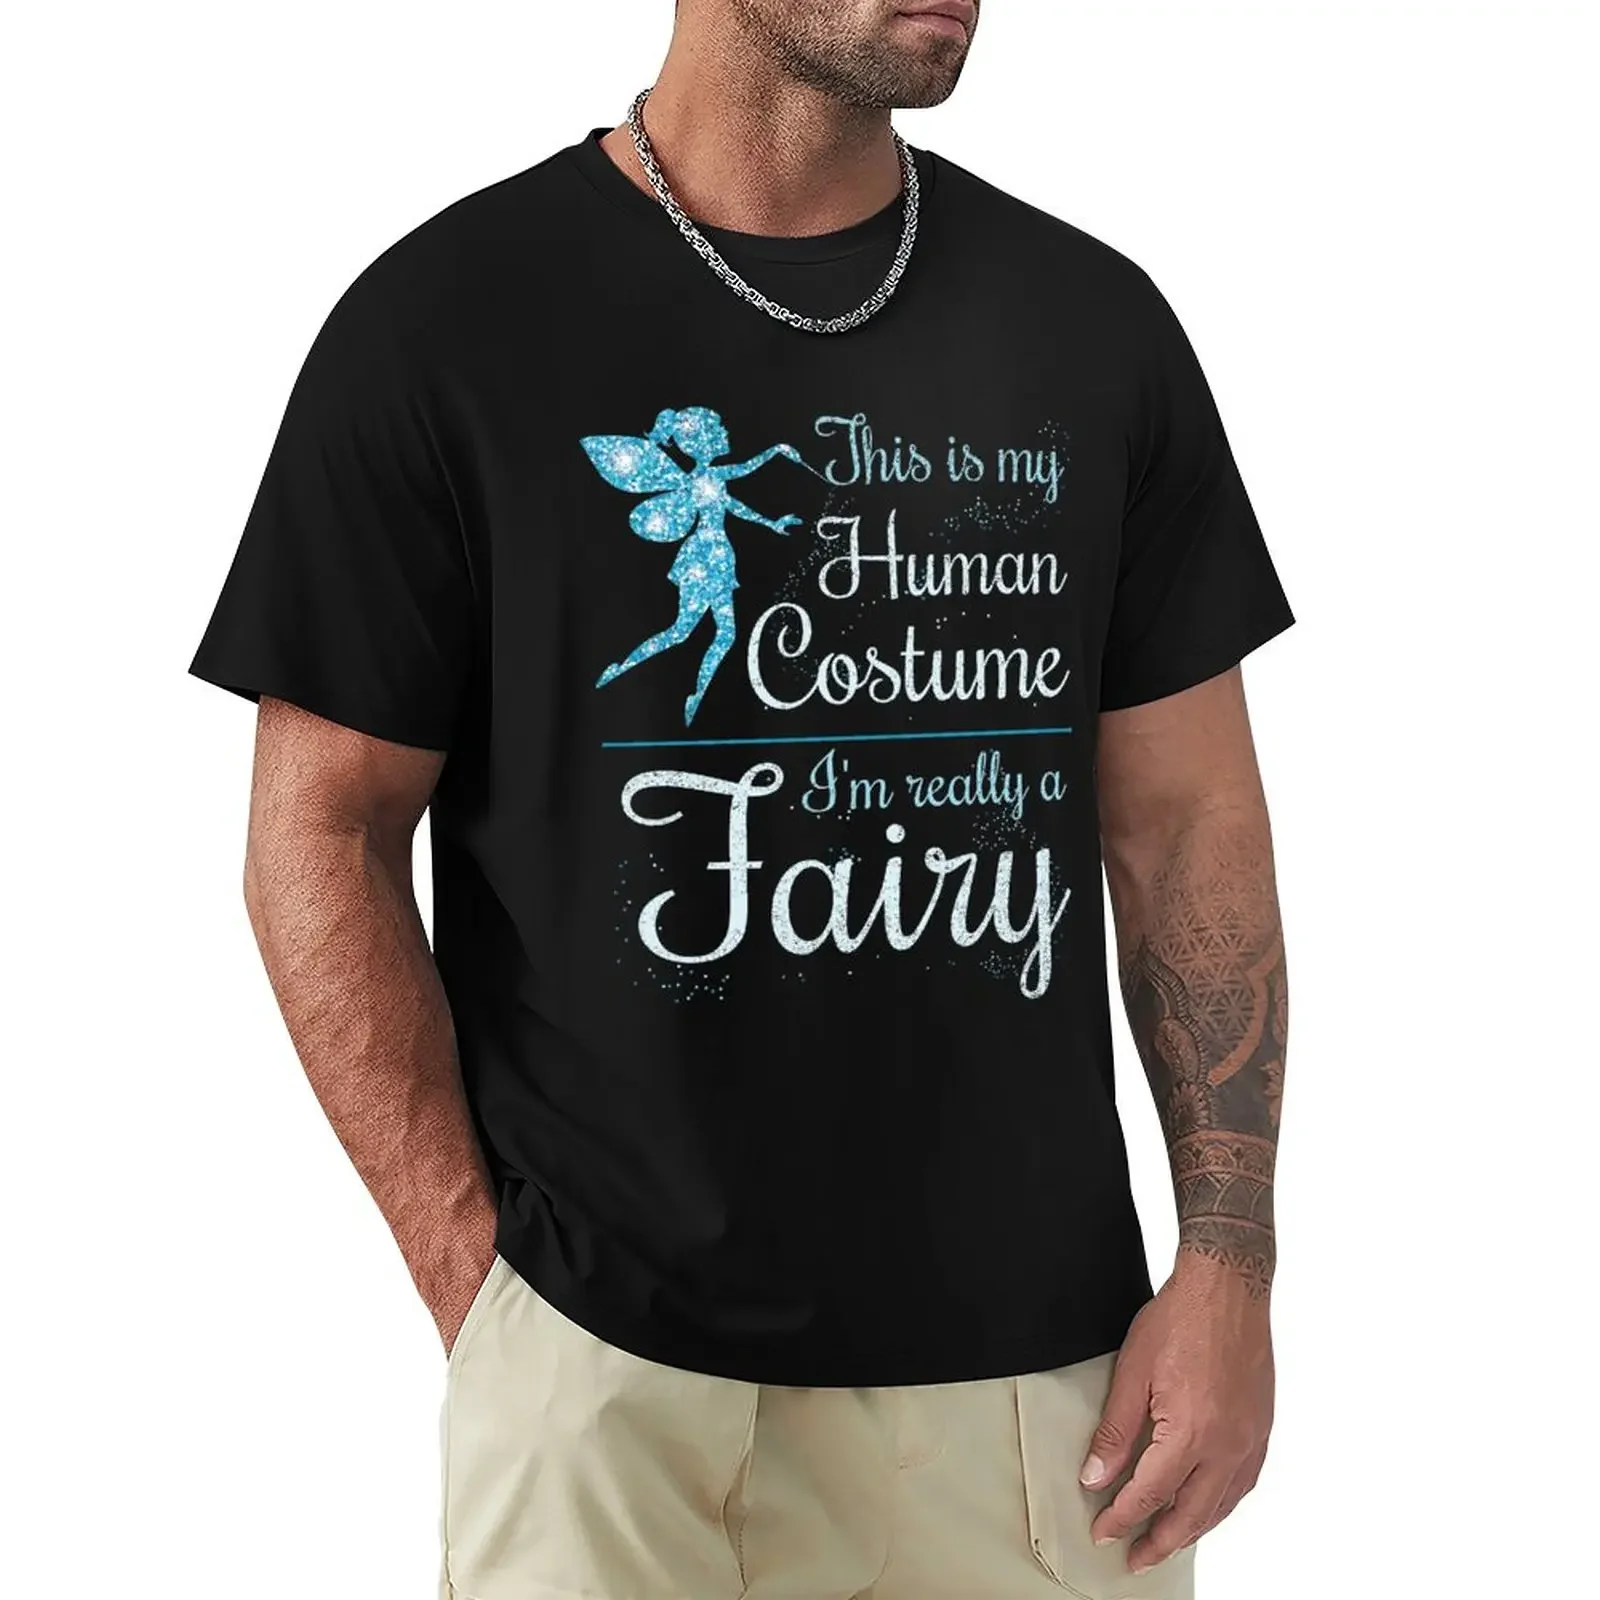 

This Is My Human Costume I'm Really a Fairy Shirt - Very Funny and Cute Girls Fairy Shirt T-Shirt anime clothes men t shirt